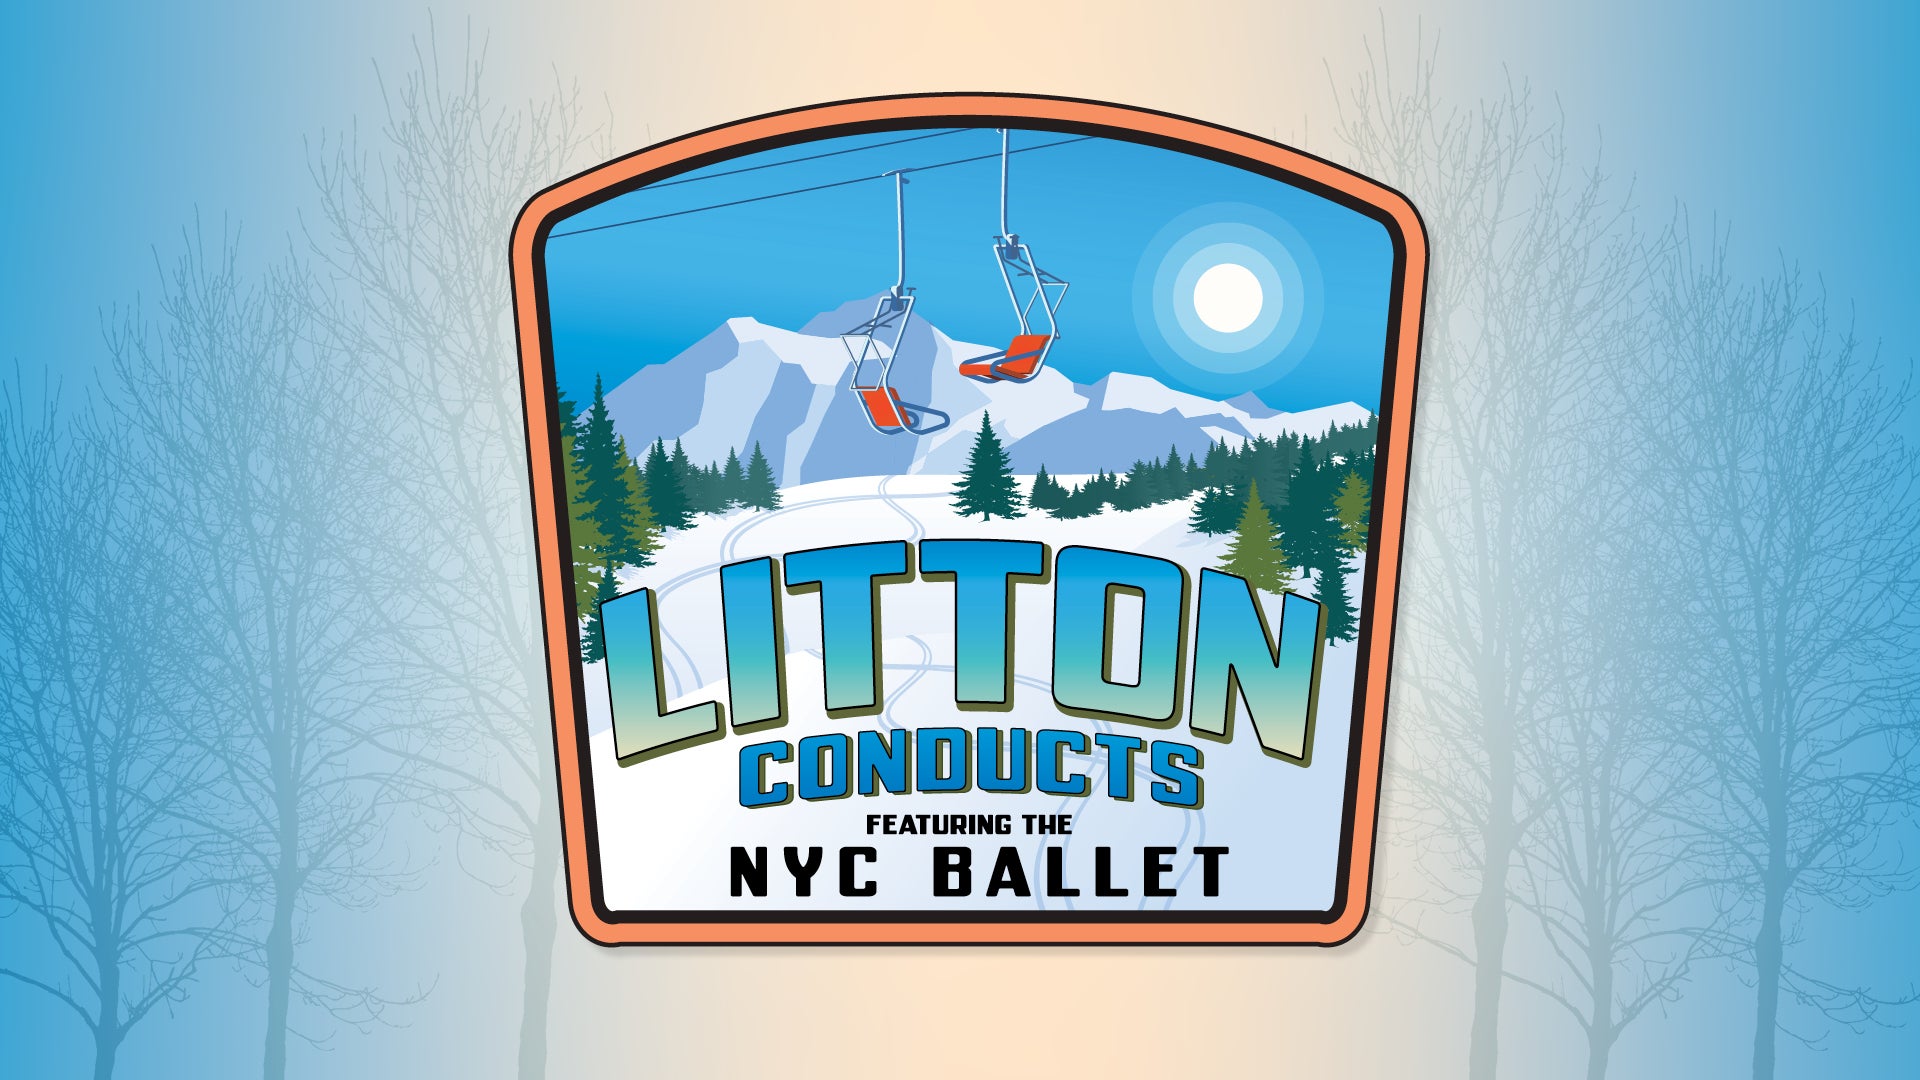 Litton Conducts feat. the NYC Ballet